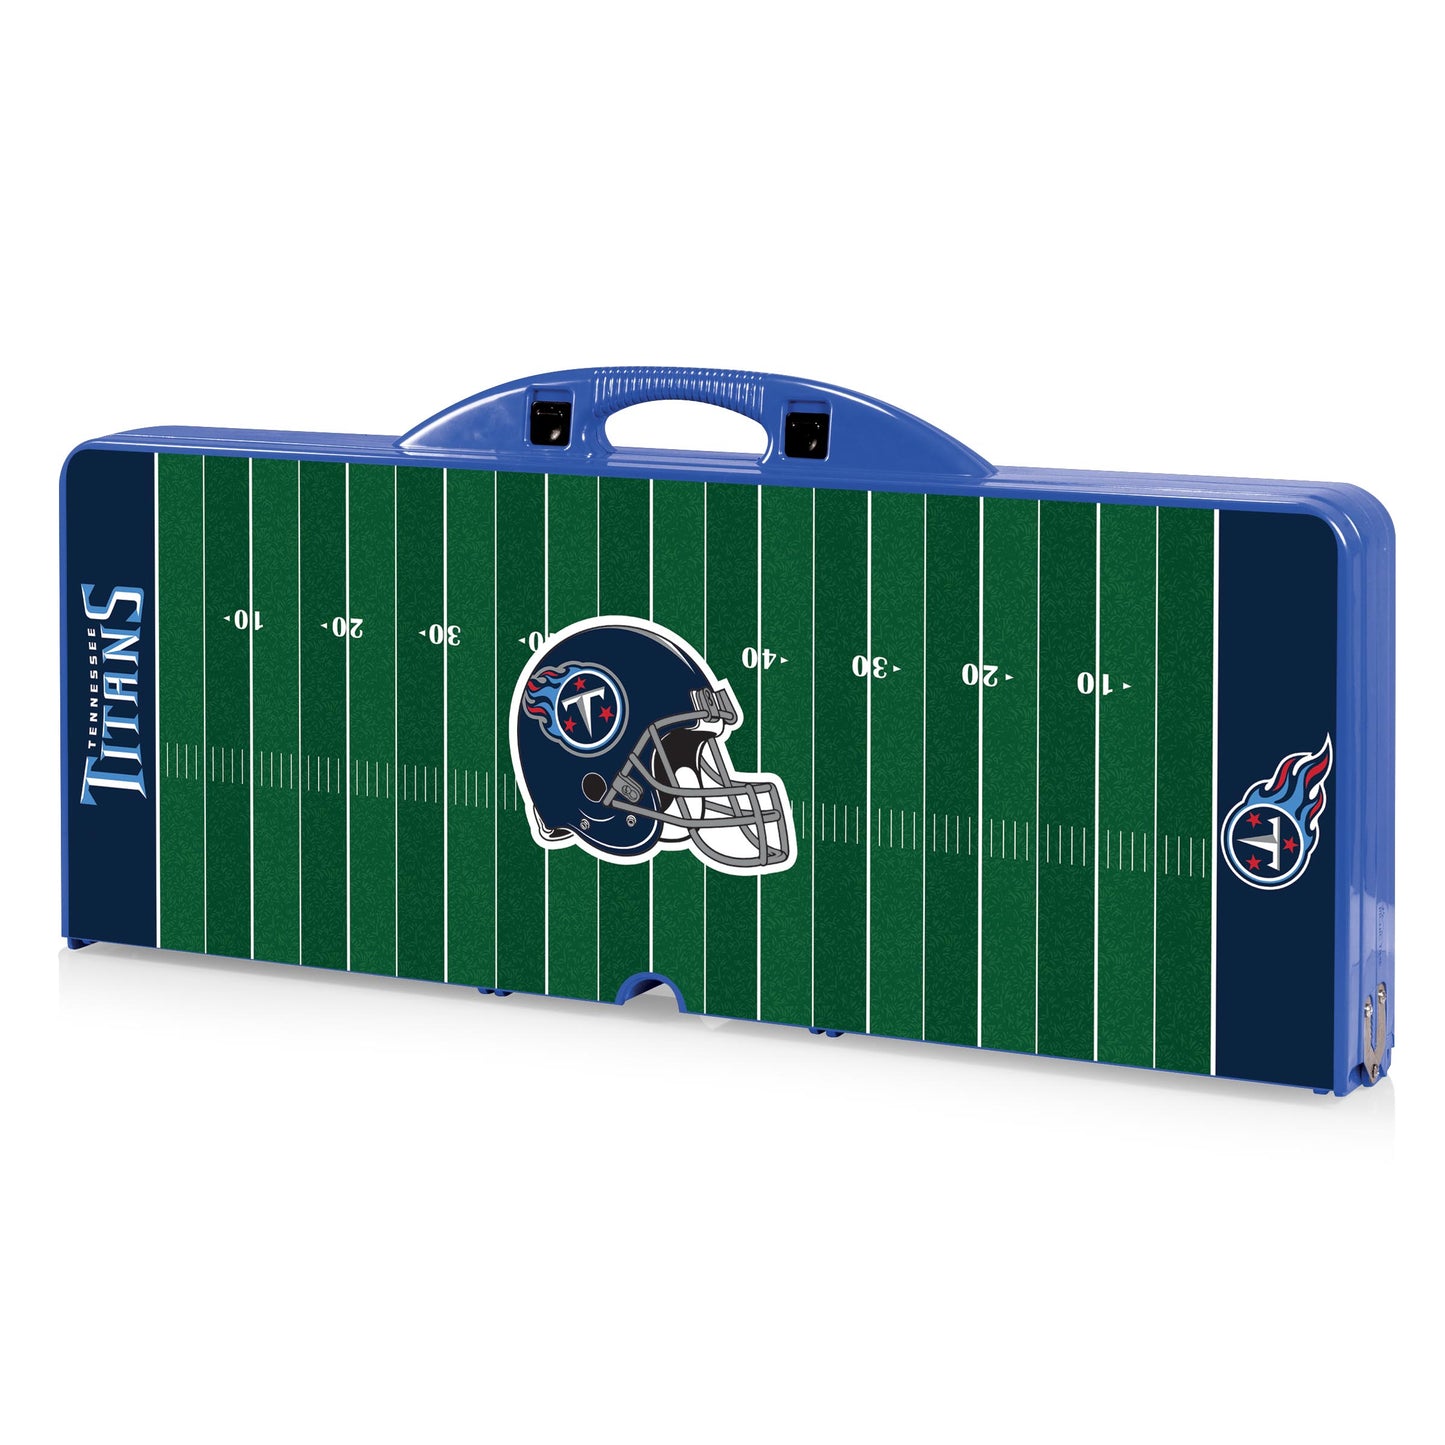 Tennessee Titans - Picnic Table Portable Folding Table with Seats - Football Field Style